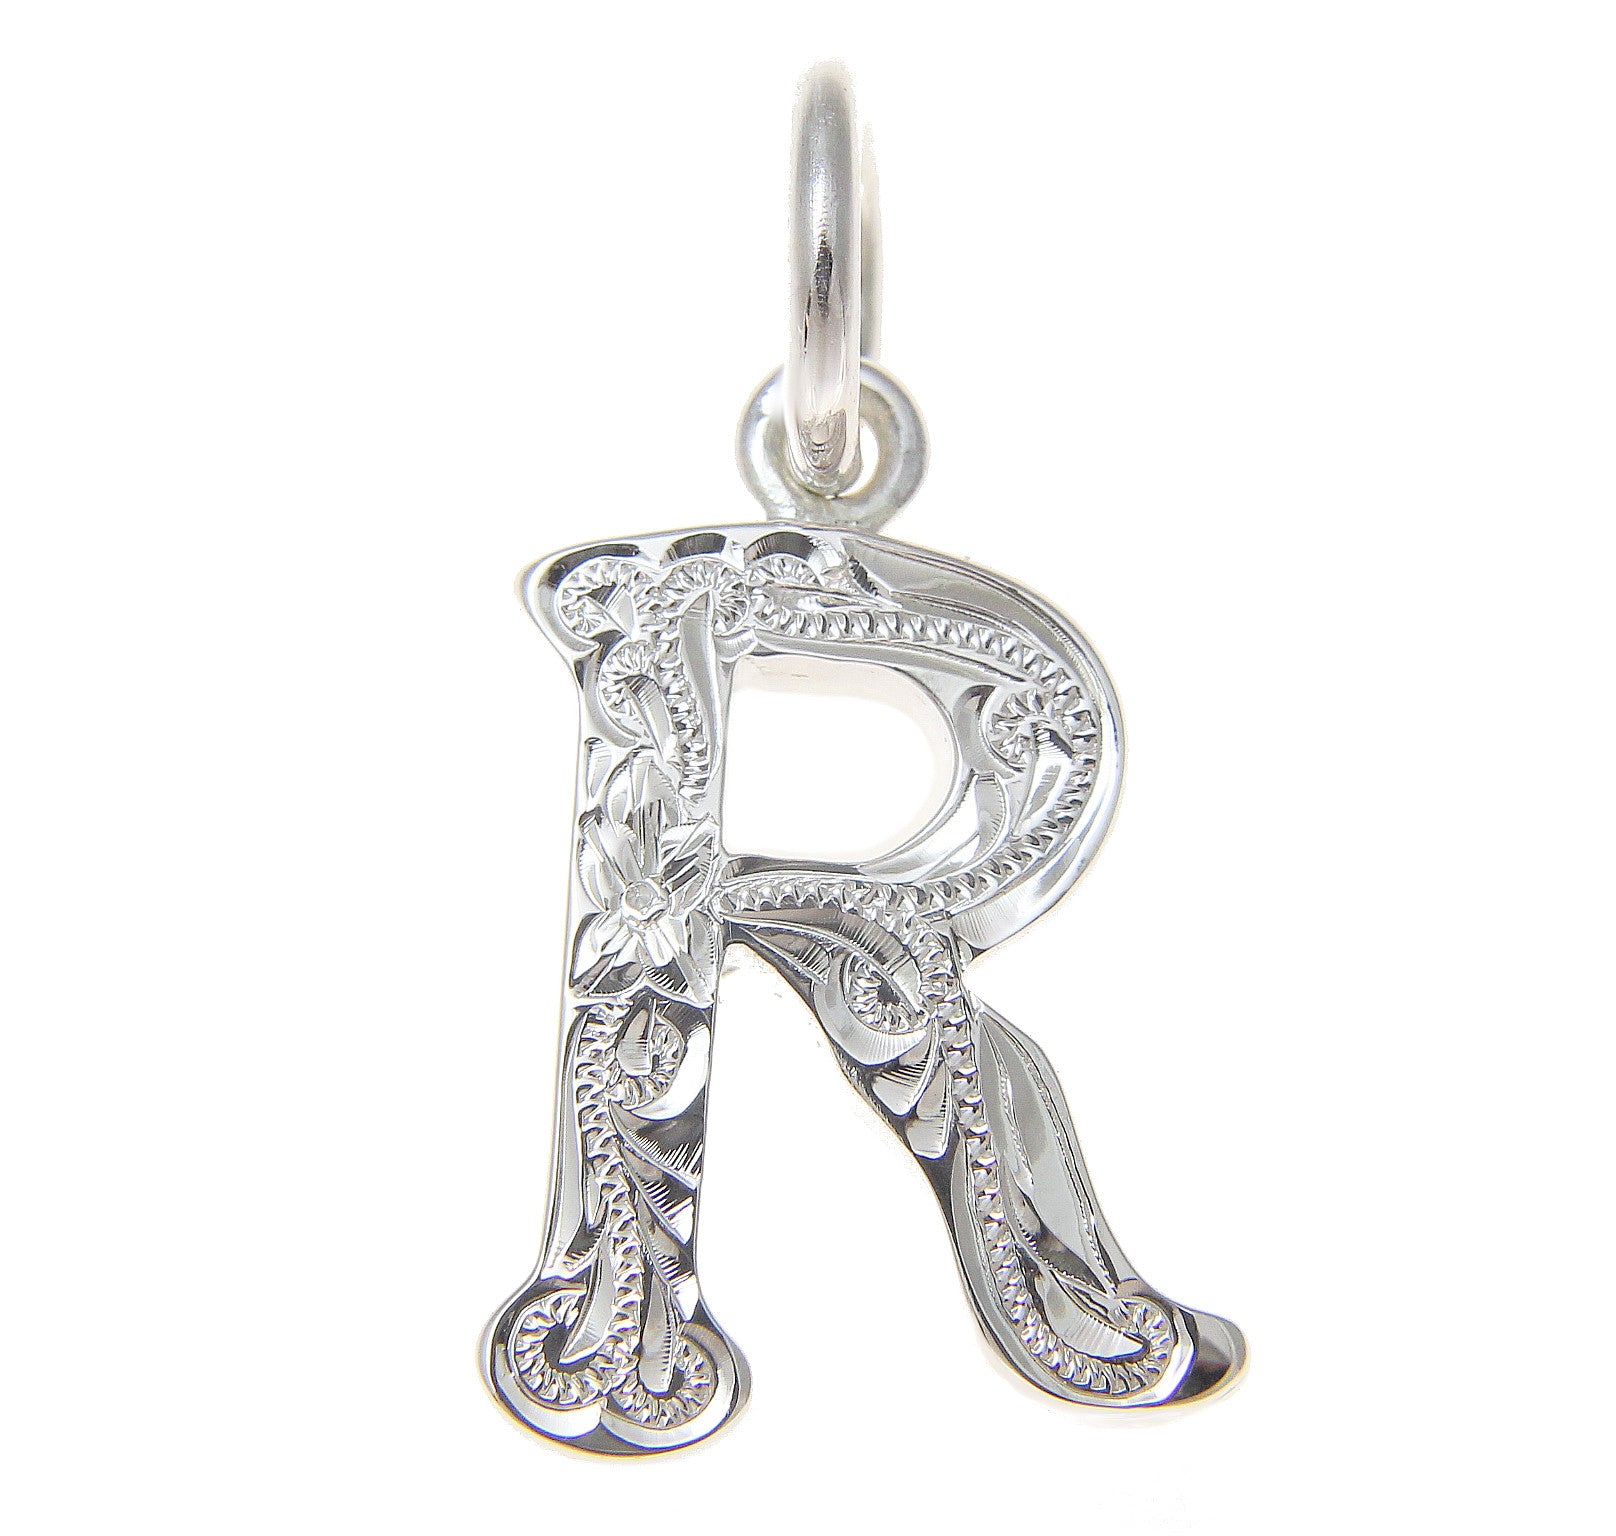 1pc Vintage 925 Sterling Silver Color Letter-R Charms Pendant for Sterling  Silver Bracelet or Bangle Fine Jewelry Gift